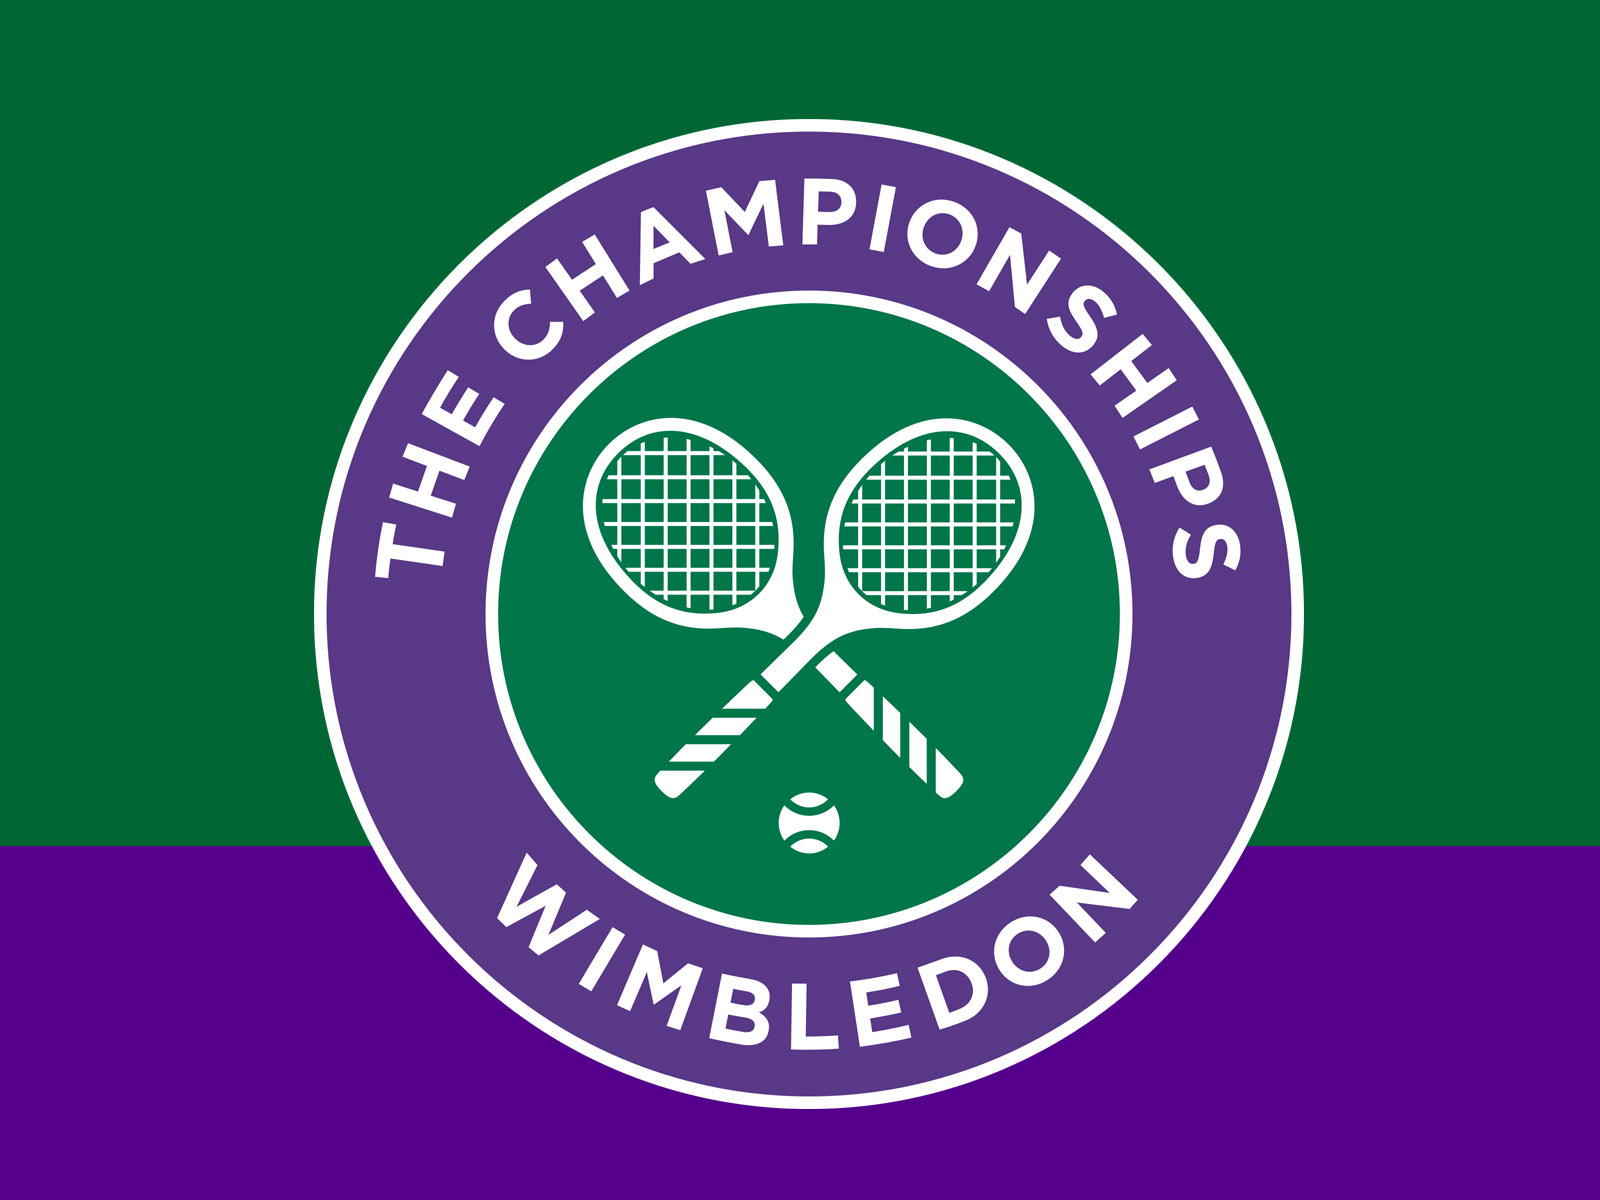 Wimbledon draw released - all eyes on Fedal quarter final ...